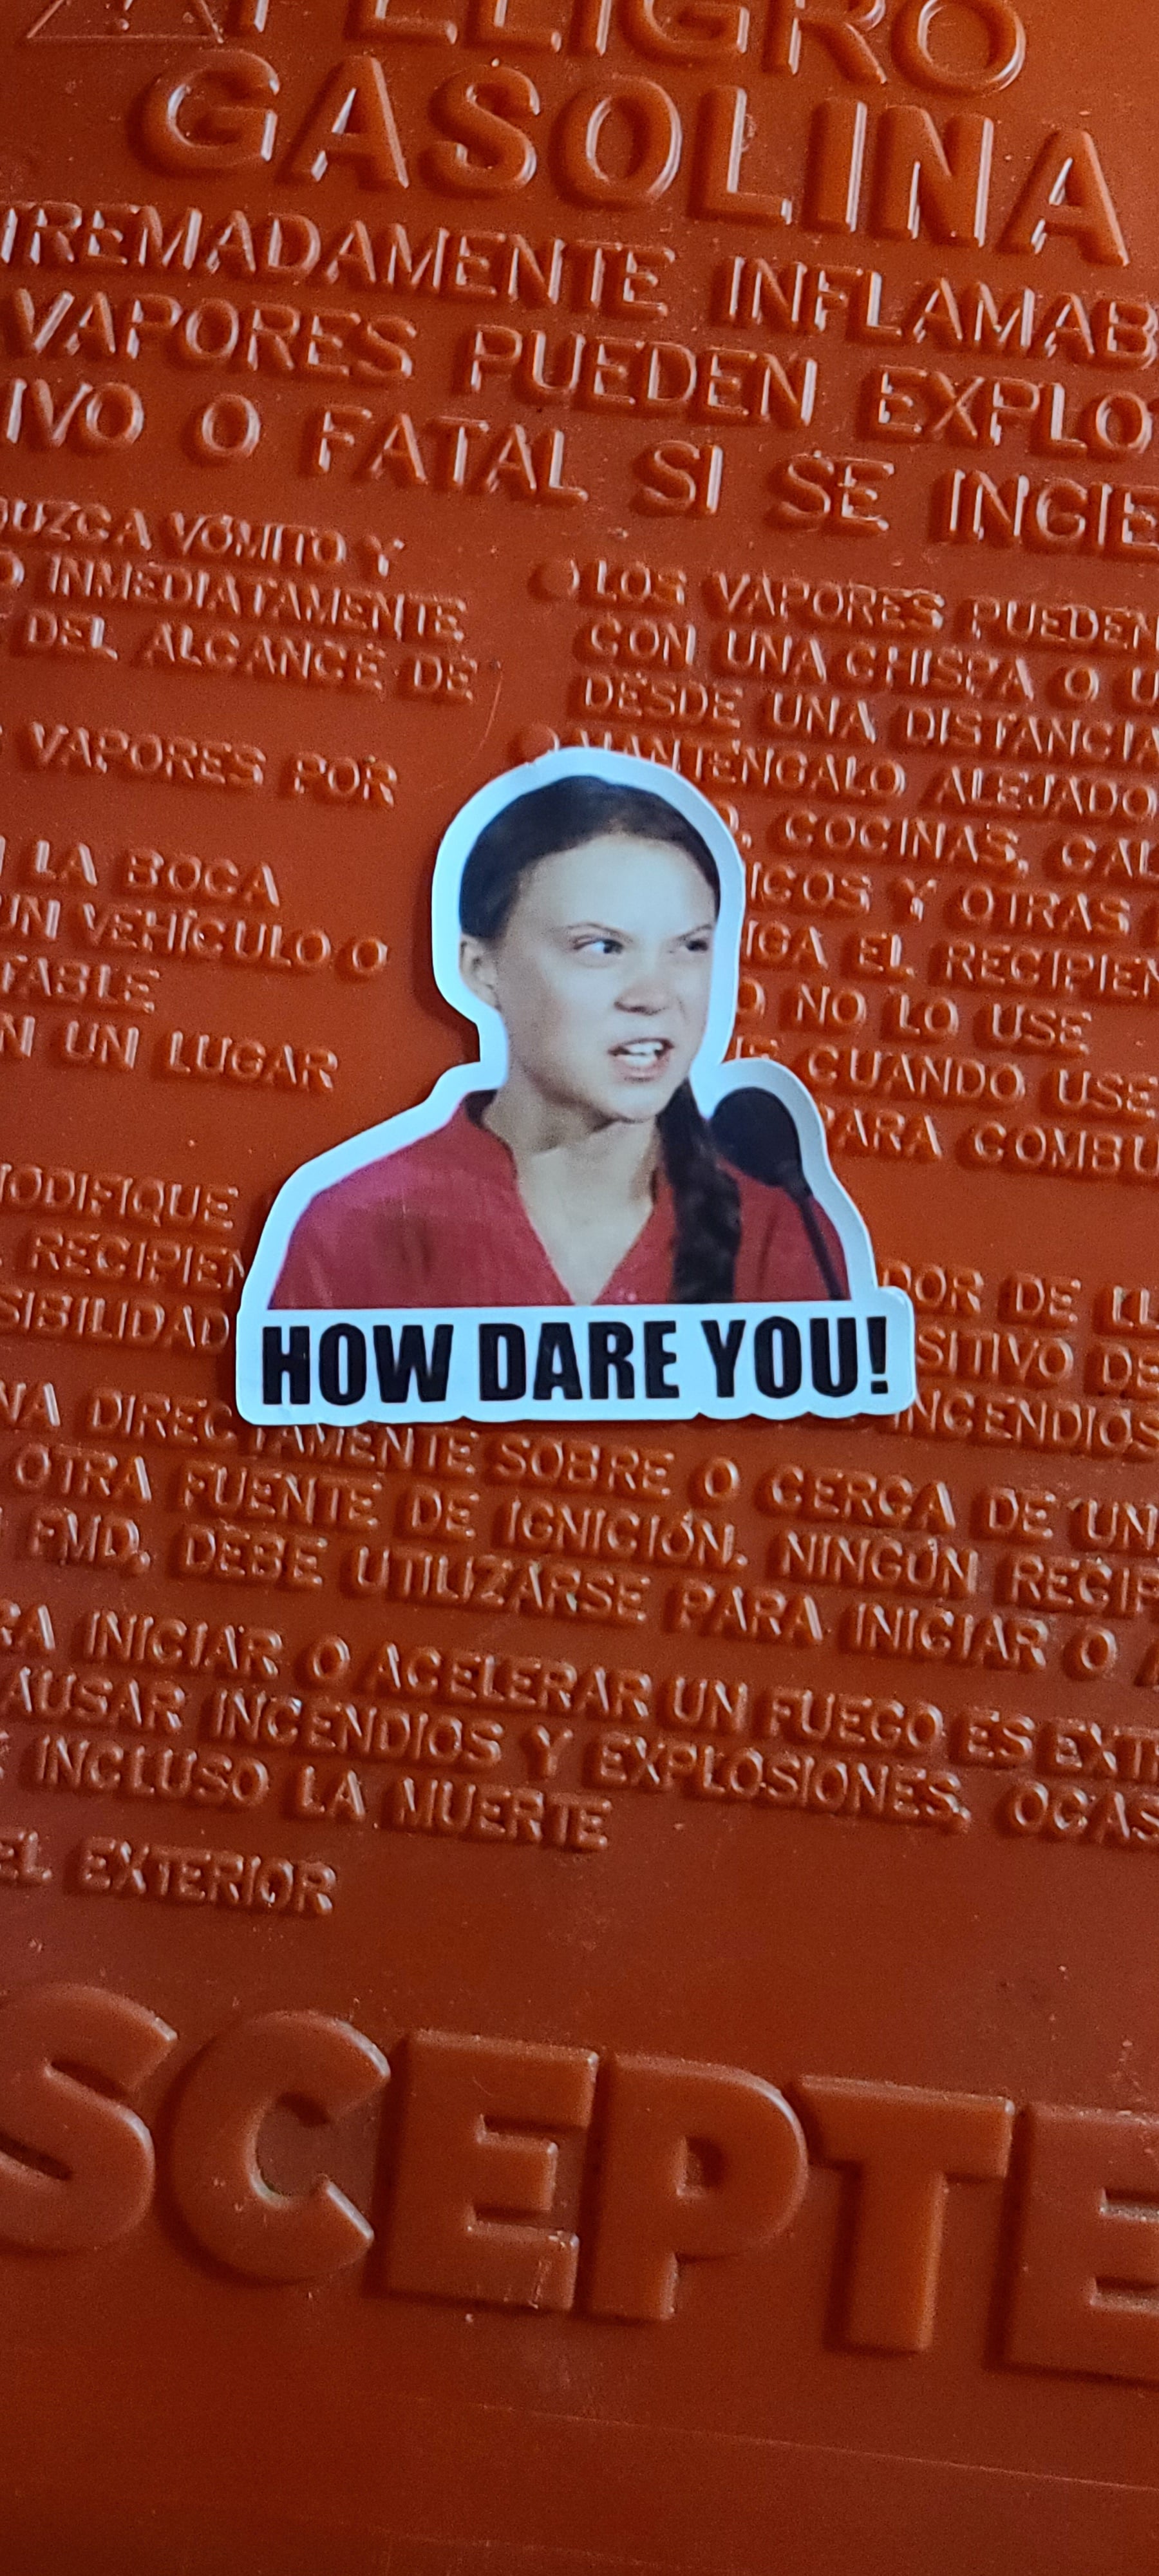 HOW DARE YOU - Sticker sheet - For your gas tank / gas can / lawn mower Climate Change Custom stickers Die cut stickers Gas engine Global Warming Graphic design stickers Greta Greta Sticker Greta Thurnburg gretta Gretta Sticker How Dare you how dare you sticker Kiss cut stickers Peel and stick stickers Sticker design Sticker printing Sticker sheets Vinyl stickers WEF World Economic Forum